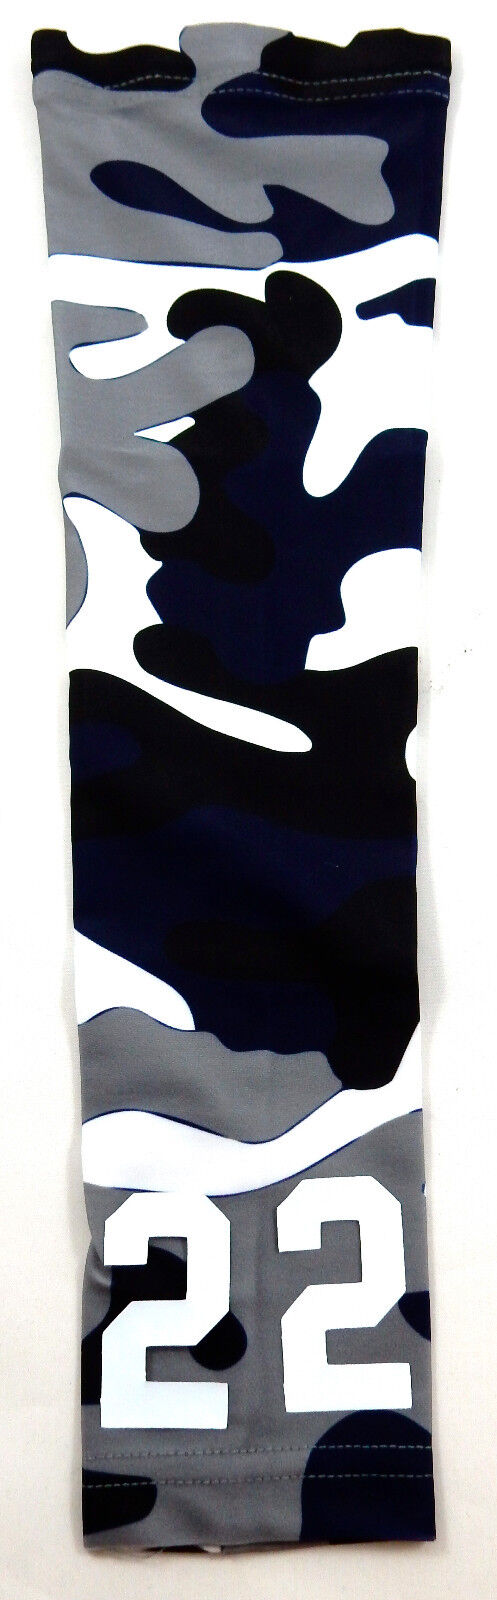 Jersey Number YOUTH LARGE Arm Sleeve Basket Camo Rare Navy Max 62% OFF Black Grey